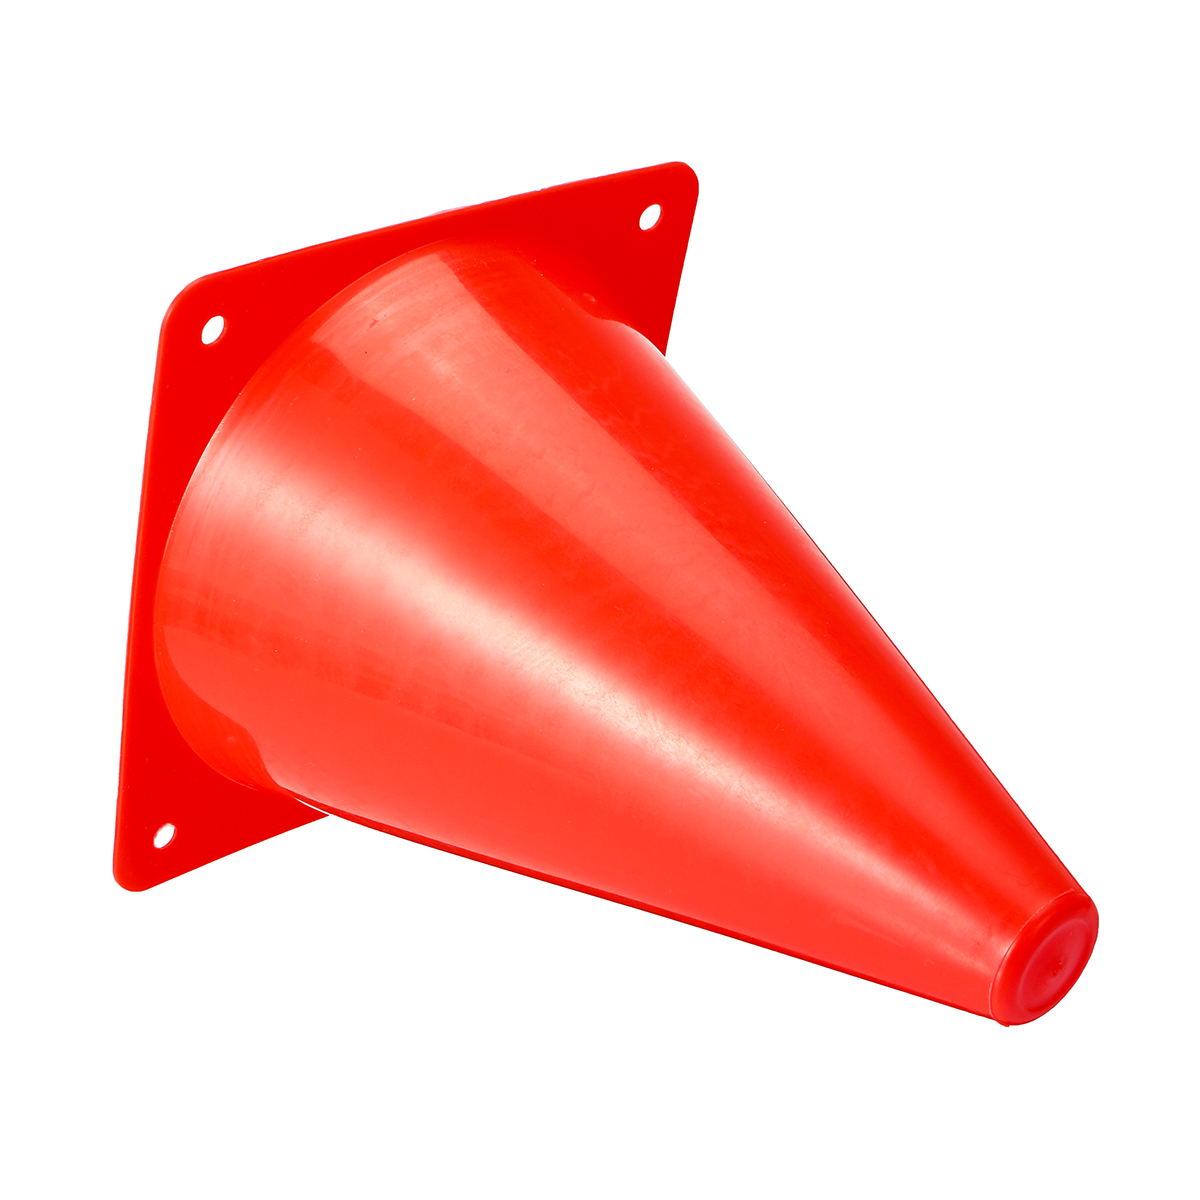 10PcsSet-Plastic-Training-Cone-Sport-Marking-Cups-Soccer-Basketball-Skate-Marker-Outdoor-Activity-Su-1486061